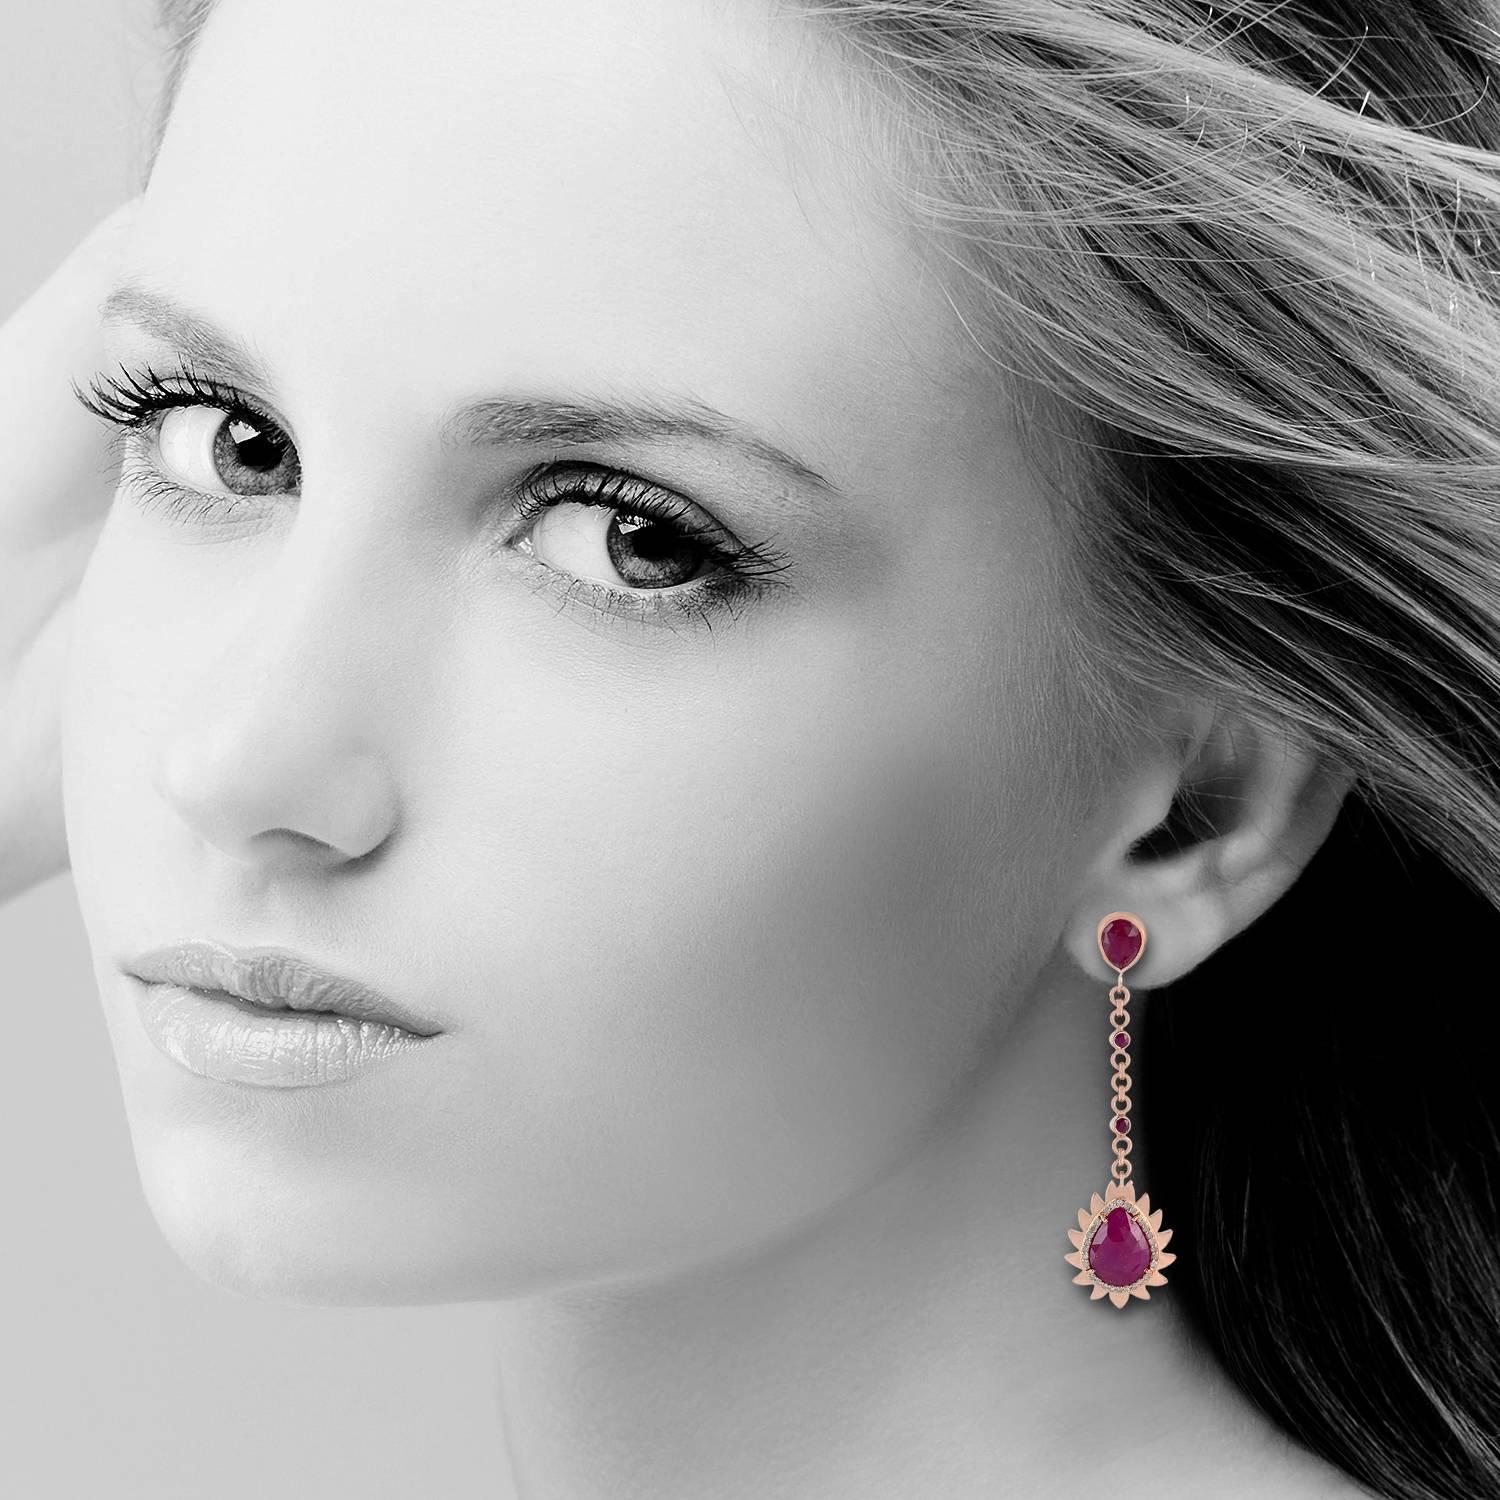 Cast in 18k gold and sterling silver.  These beautiful flame earrings are handset in 11.92 carat ruby and .32 carat of sparkling diamonds. Exquisitely framed in signature 